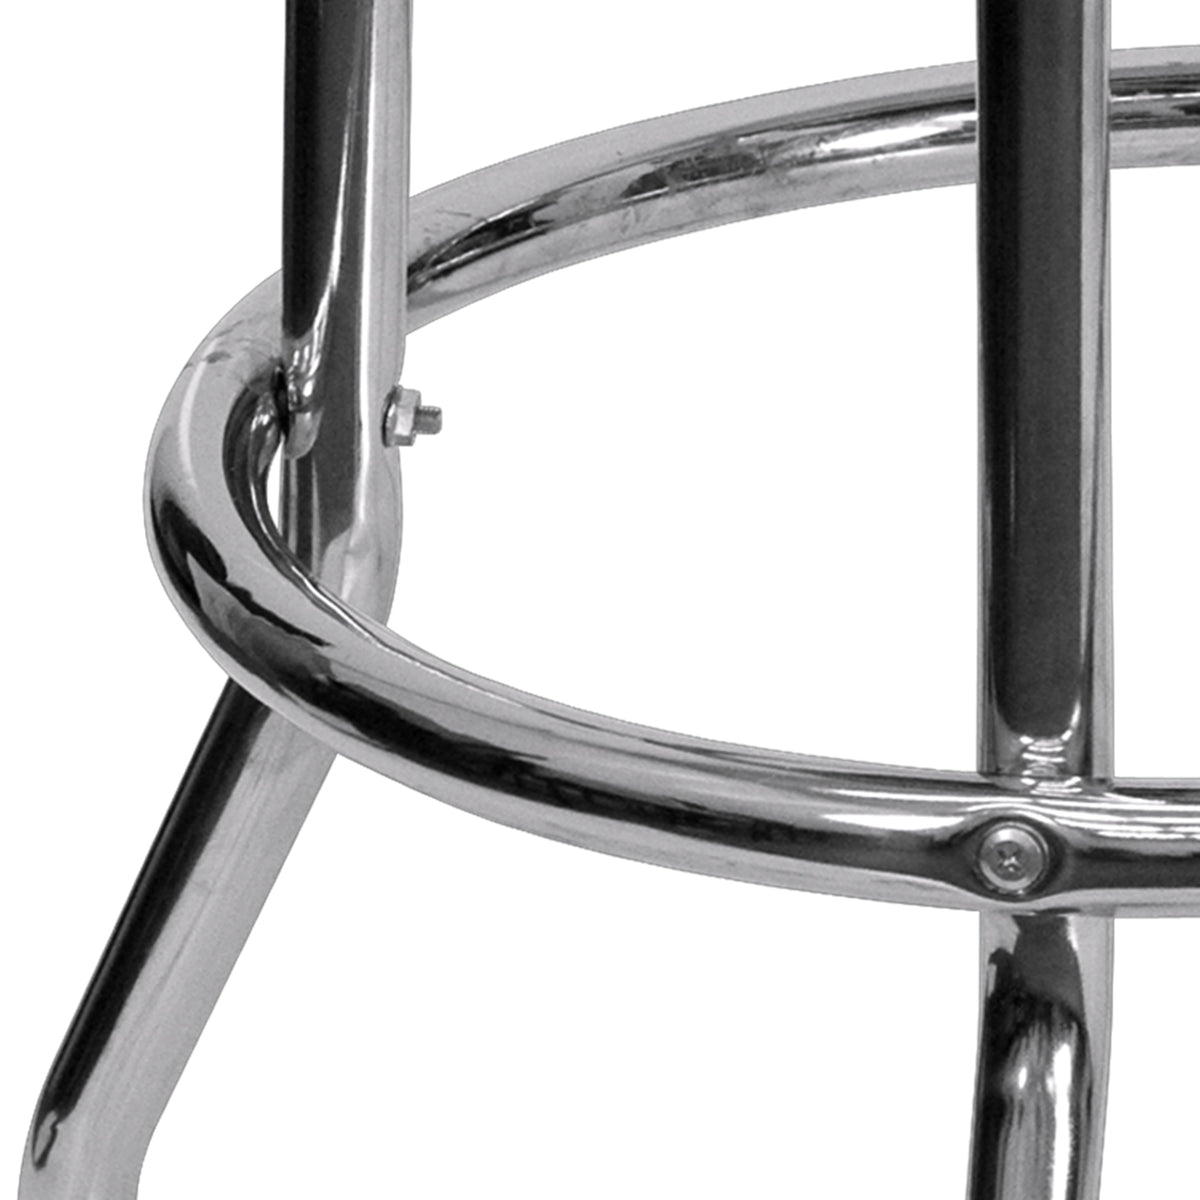 Red |#| Backless Double Ring Chrome Swivel Barstool with Red Vinyl Seat & Footrest